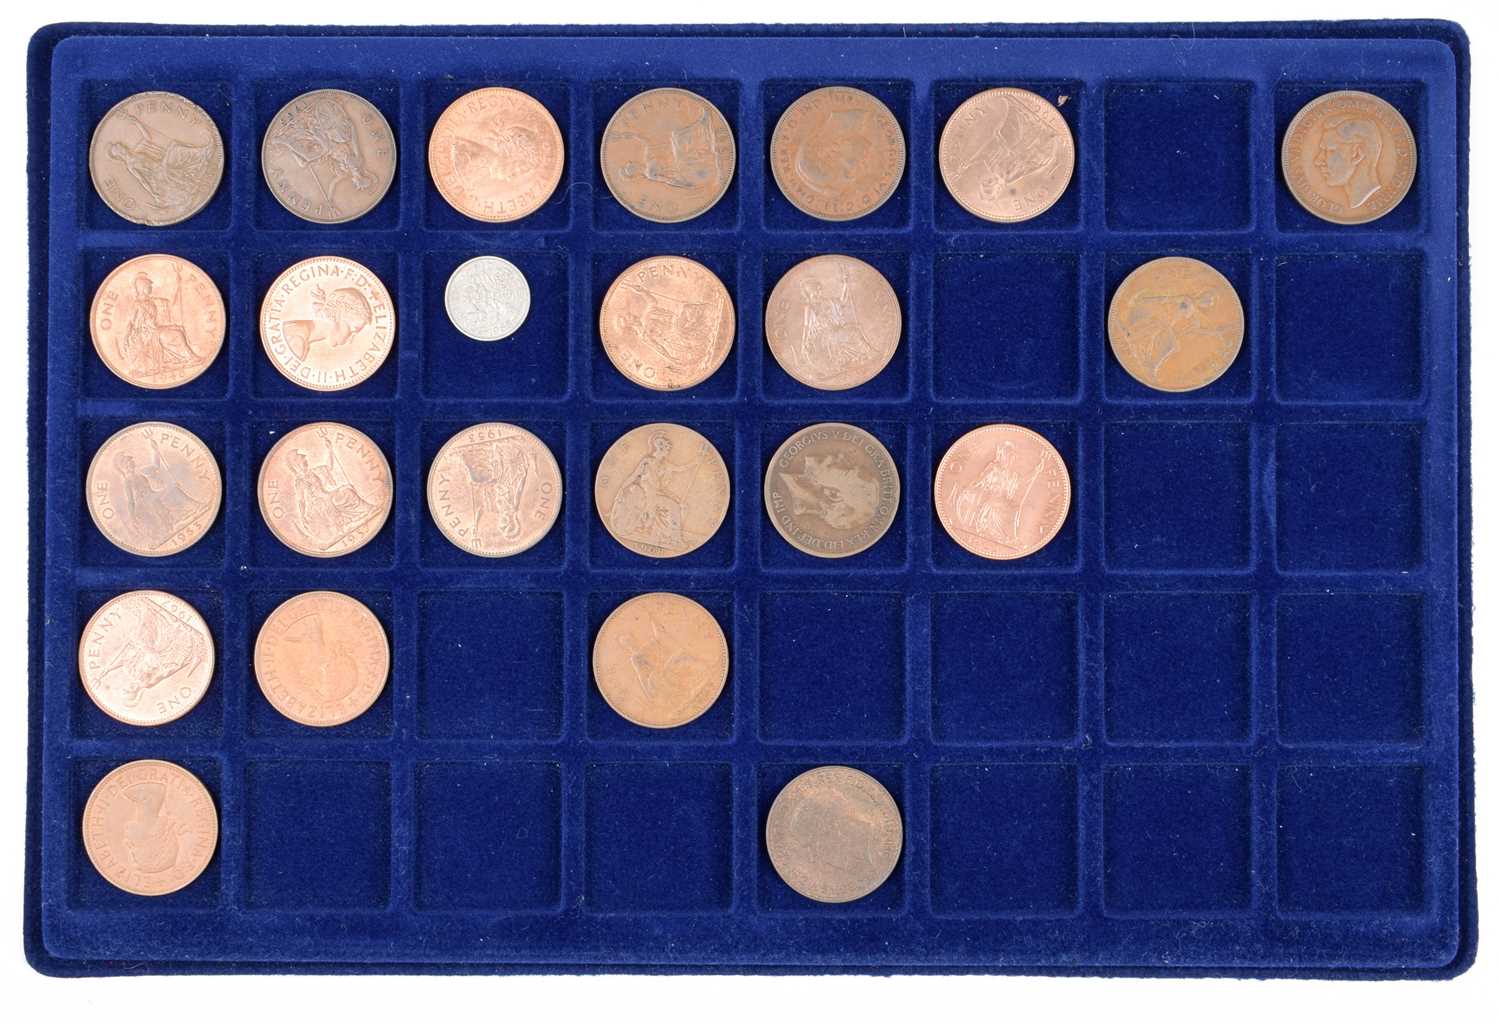 Collection of coins from George III to Elizabeth II to include many denominations. - Image 5 of 6